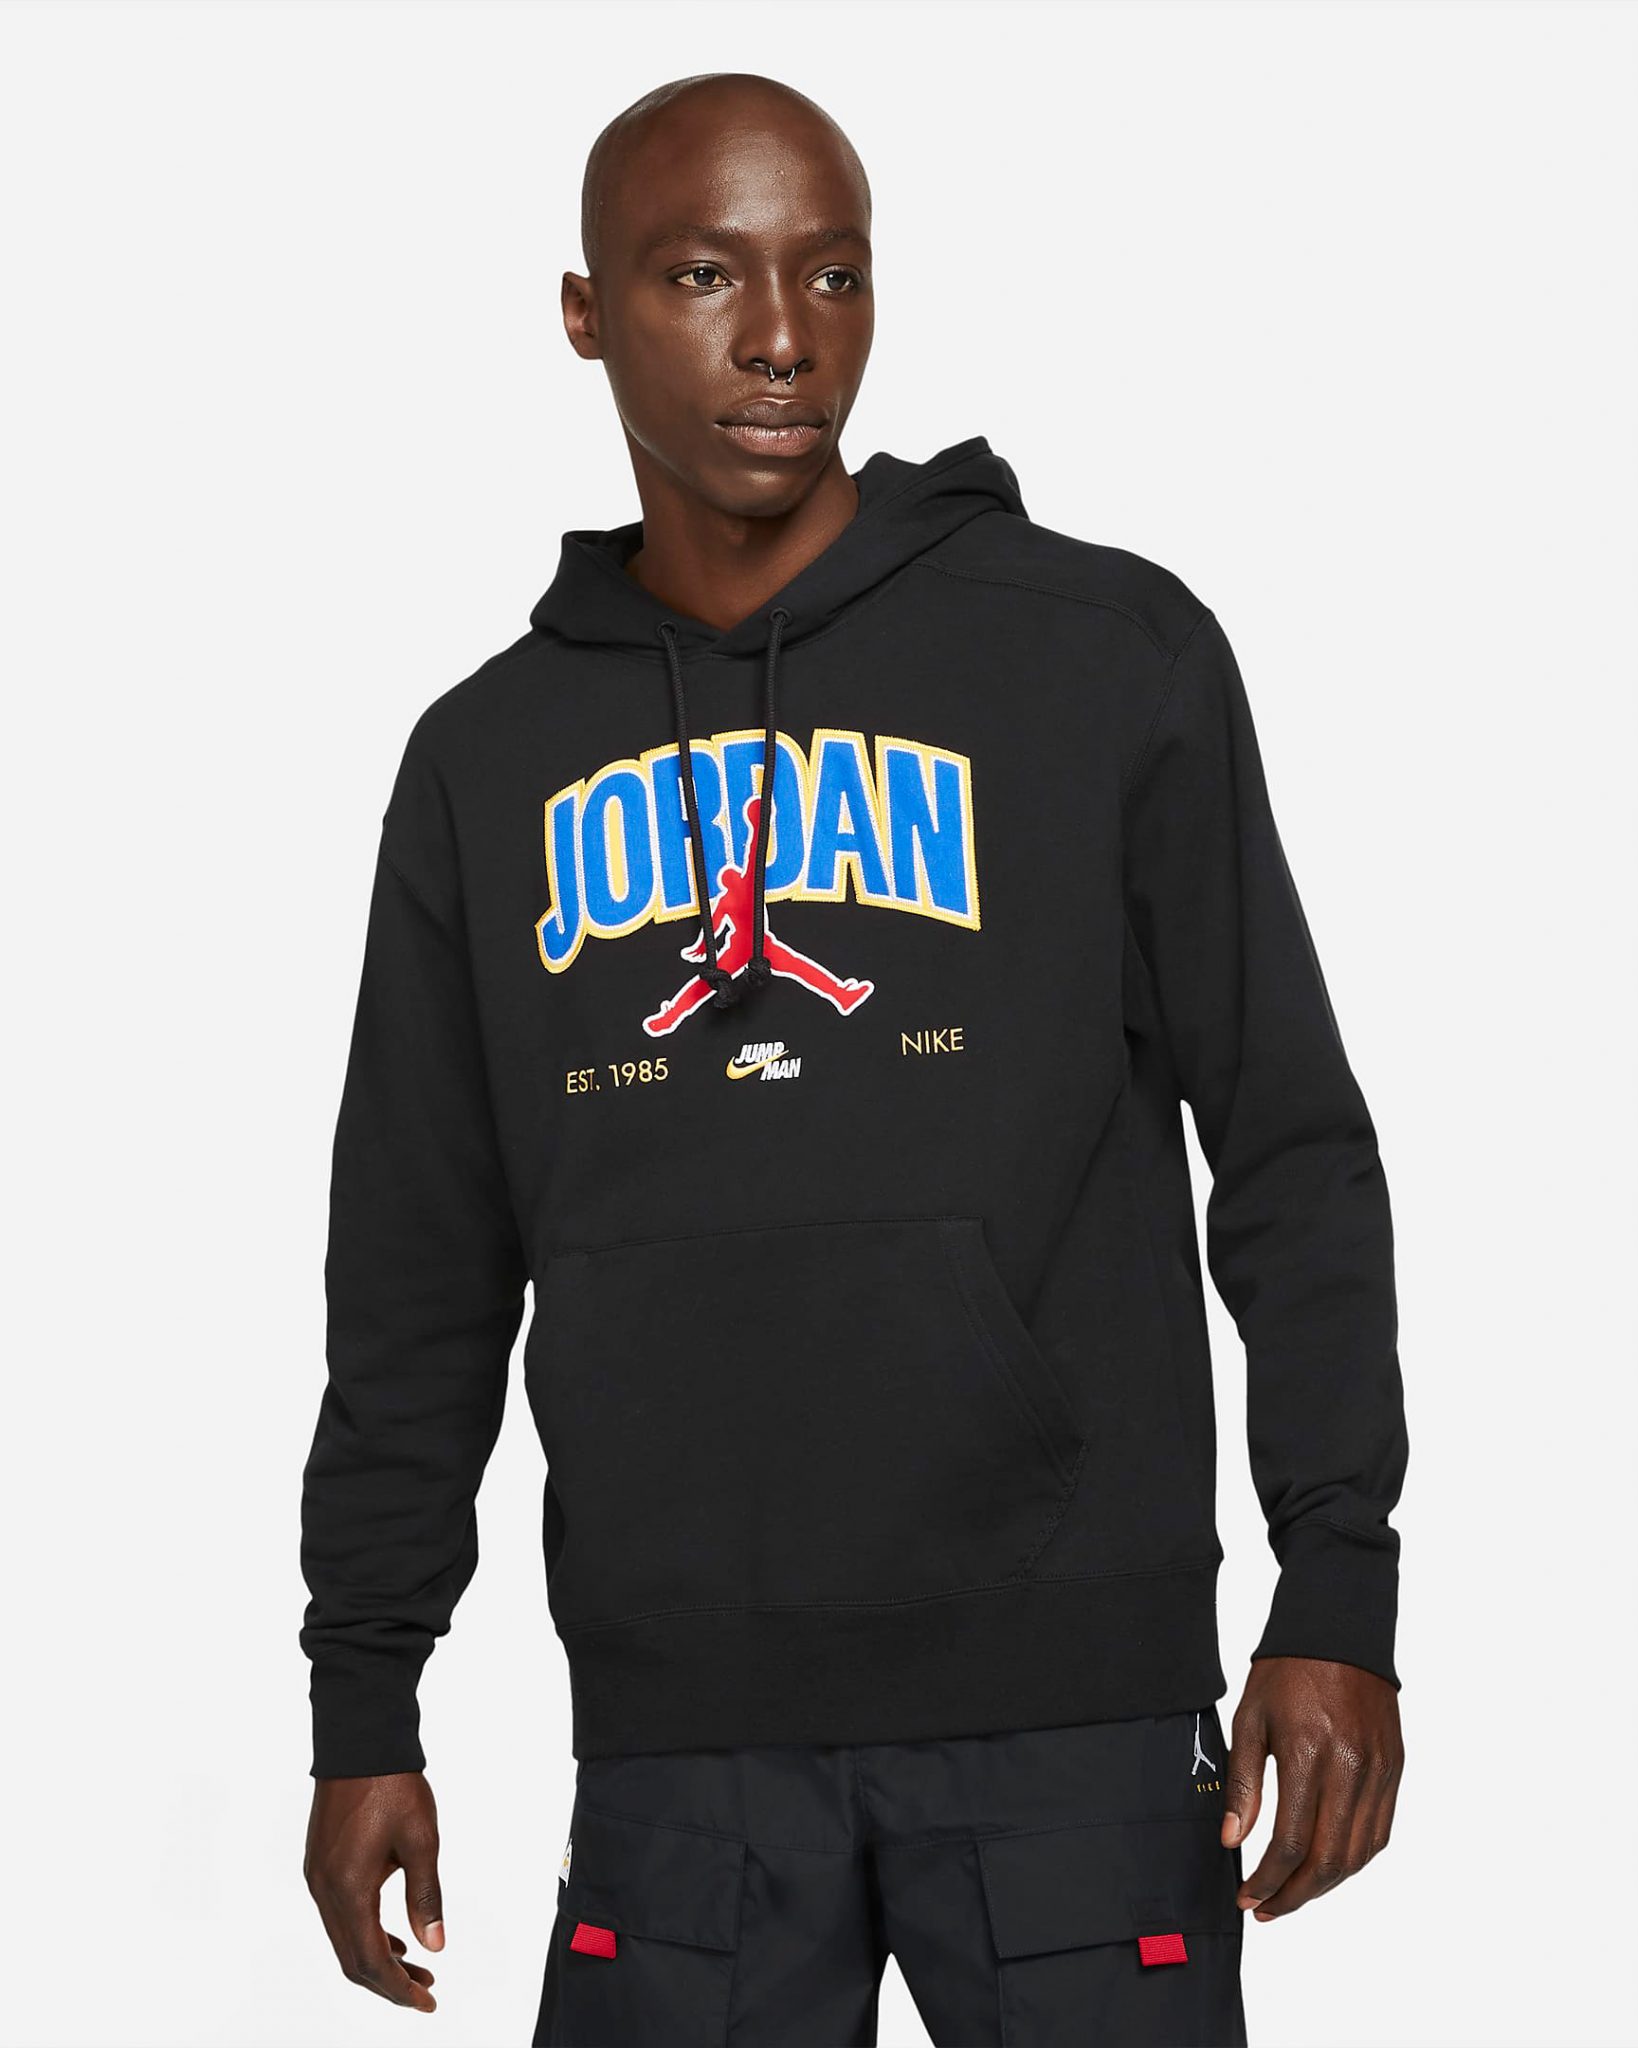 Air Jordan 3 Racer Blue Hoodie and Shorts Outfit to Match